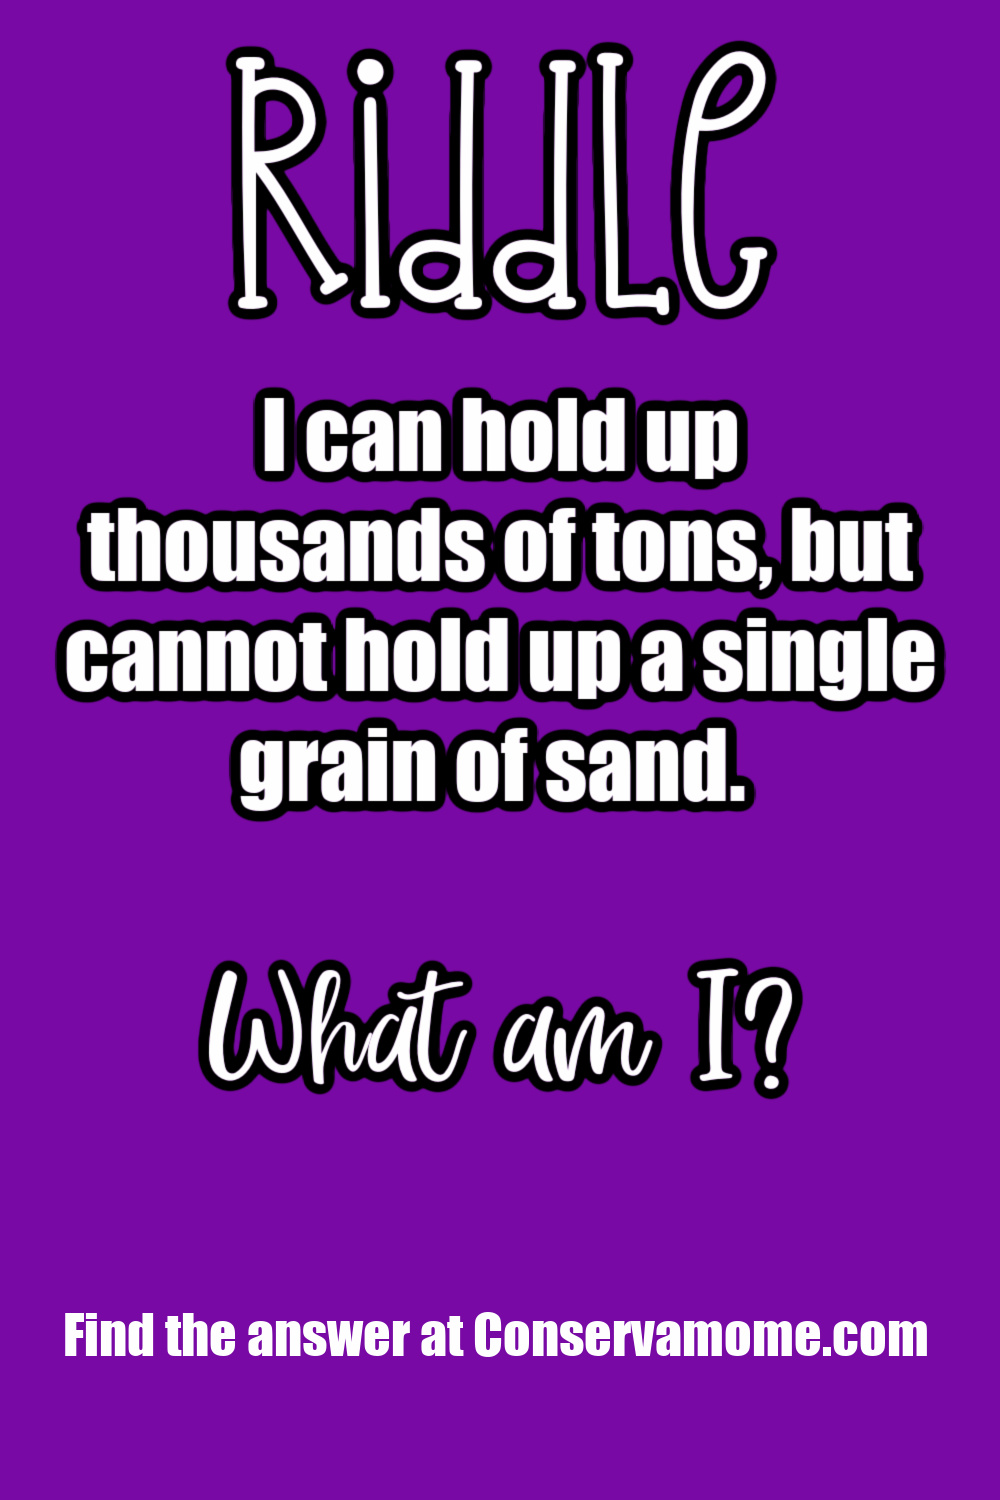 I can hold up thousands of tons, but cannot hold up a single grain of sand.